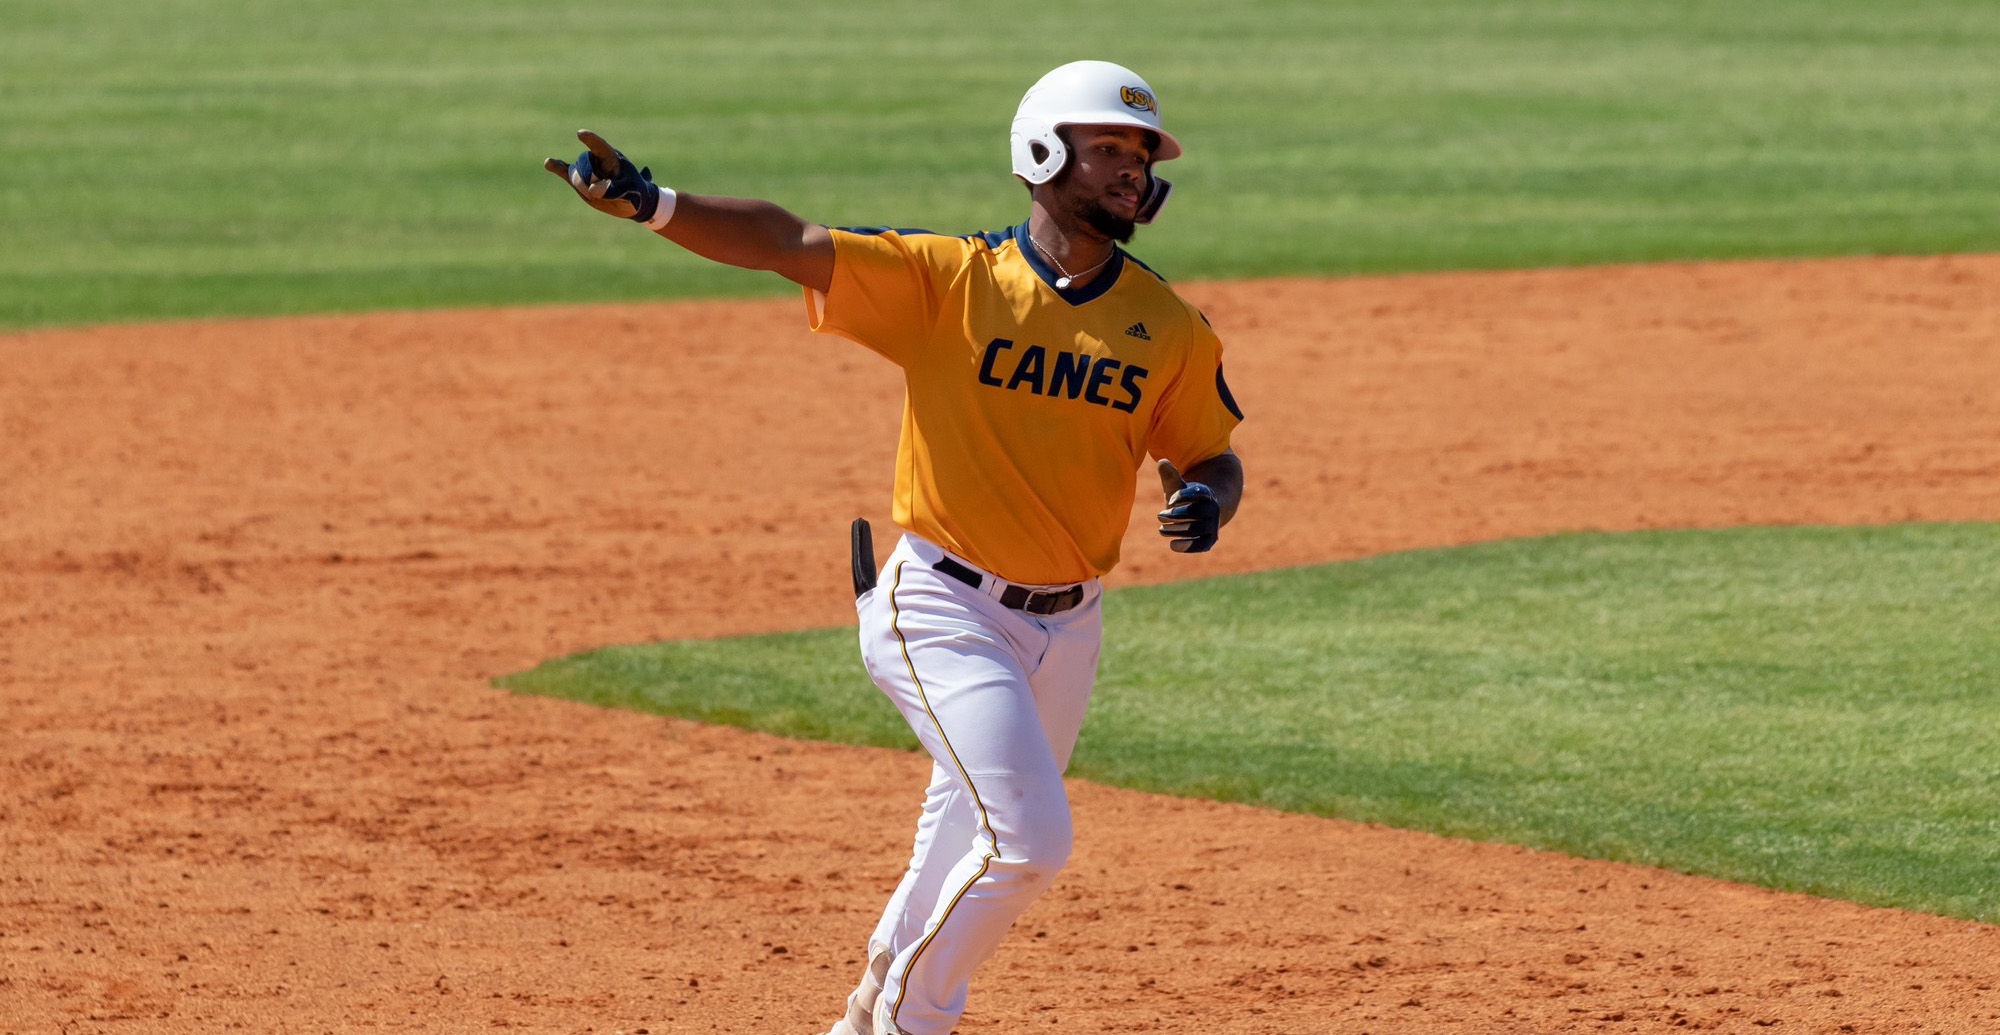 Alexander The Great Helps Lead Canes to a 10-4 Victory over UNG